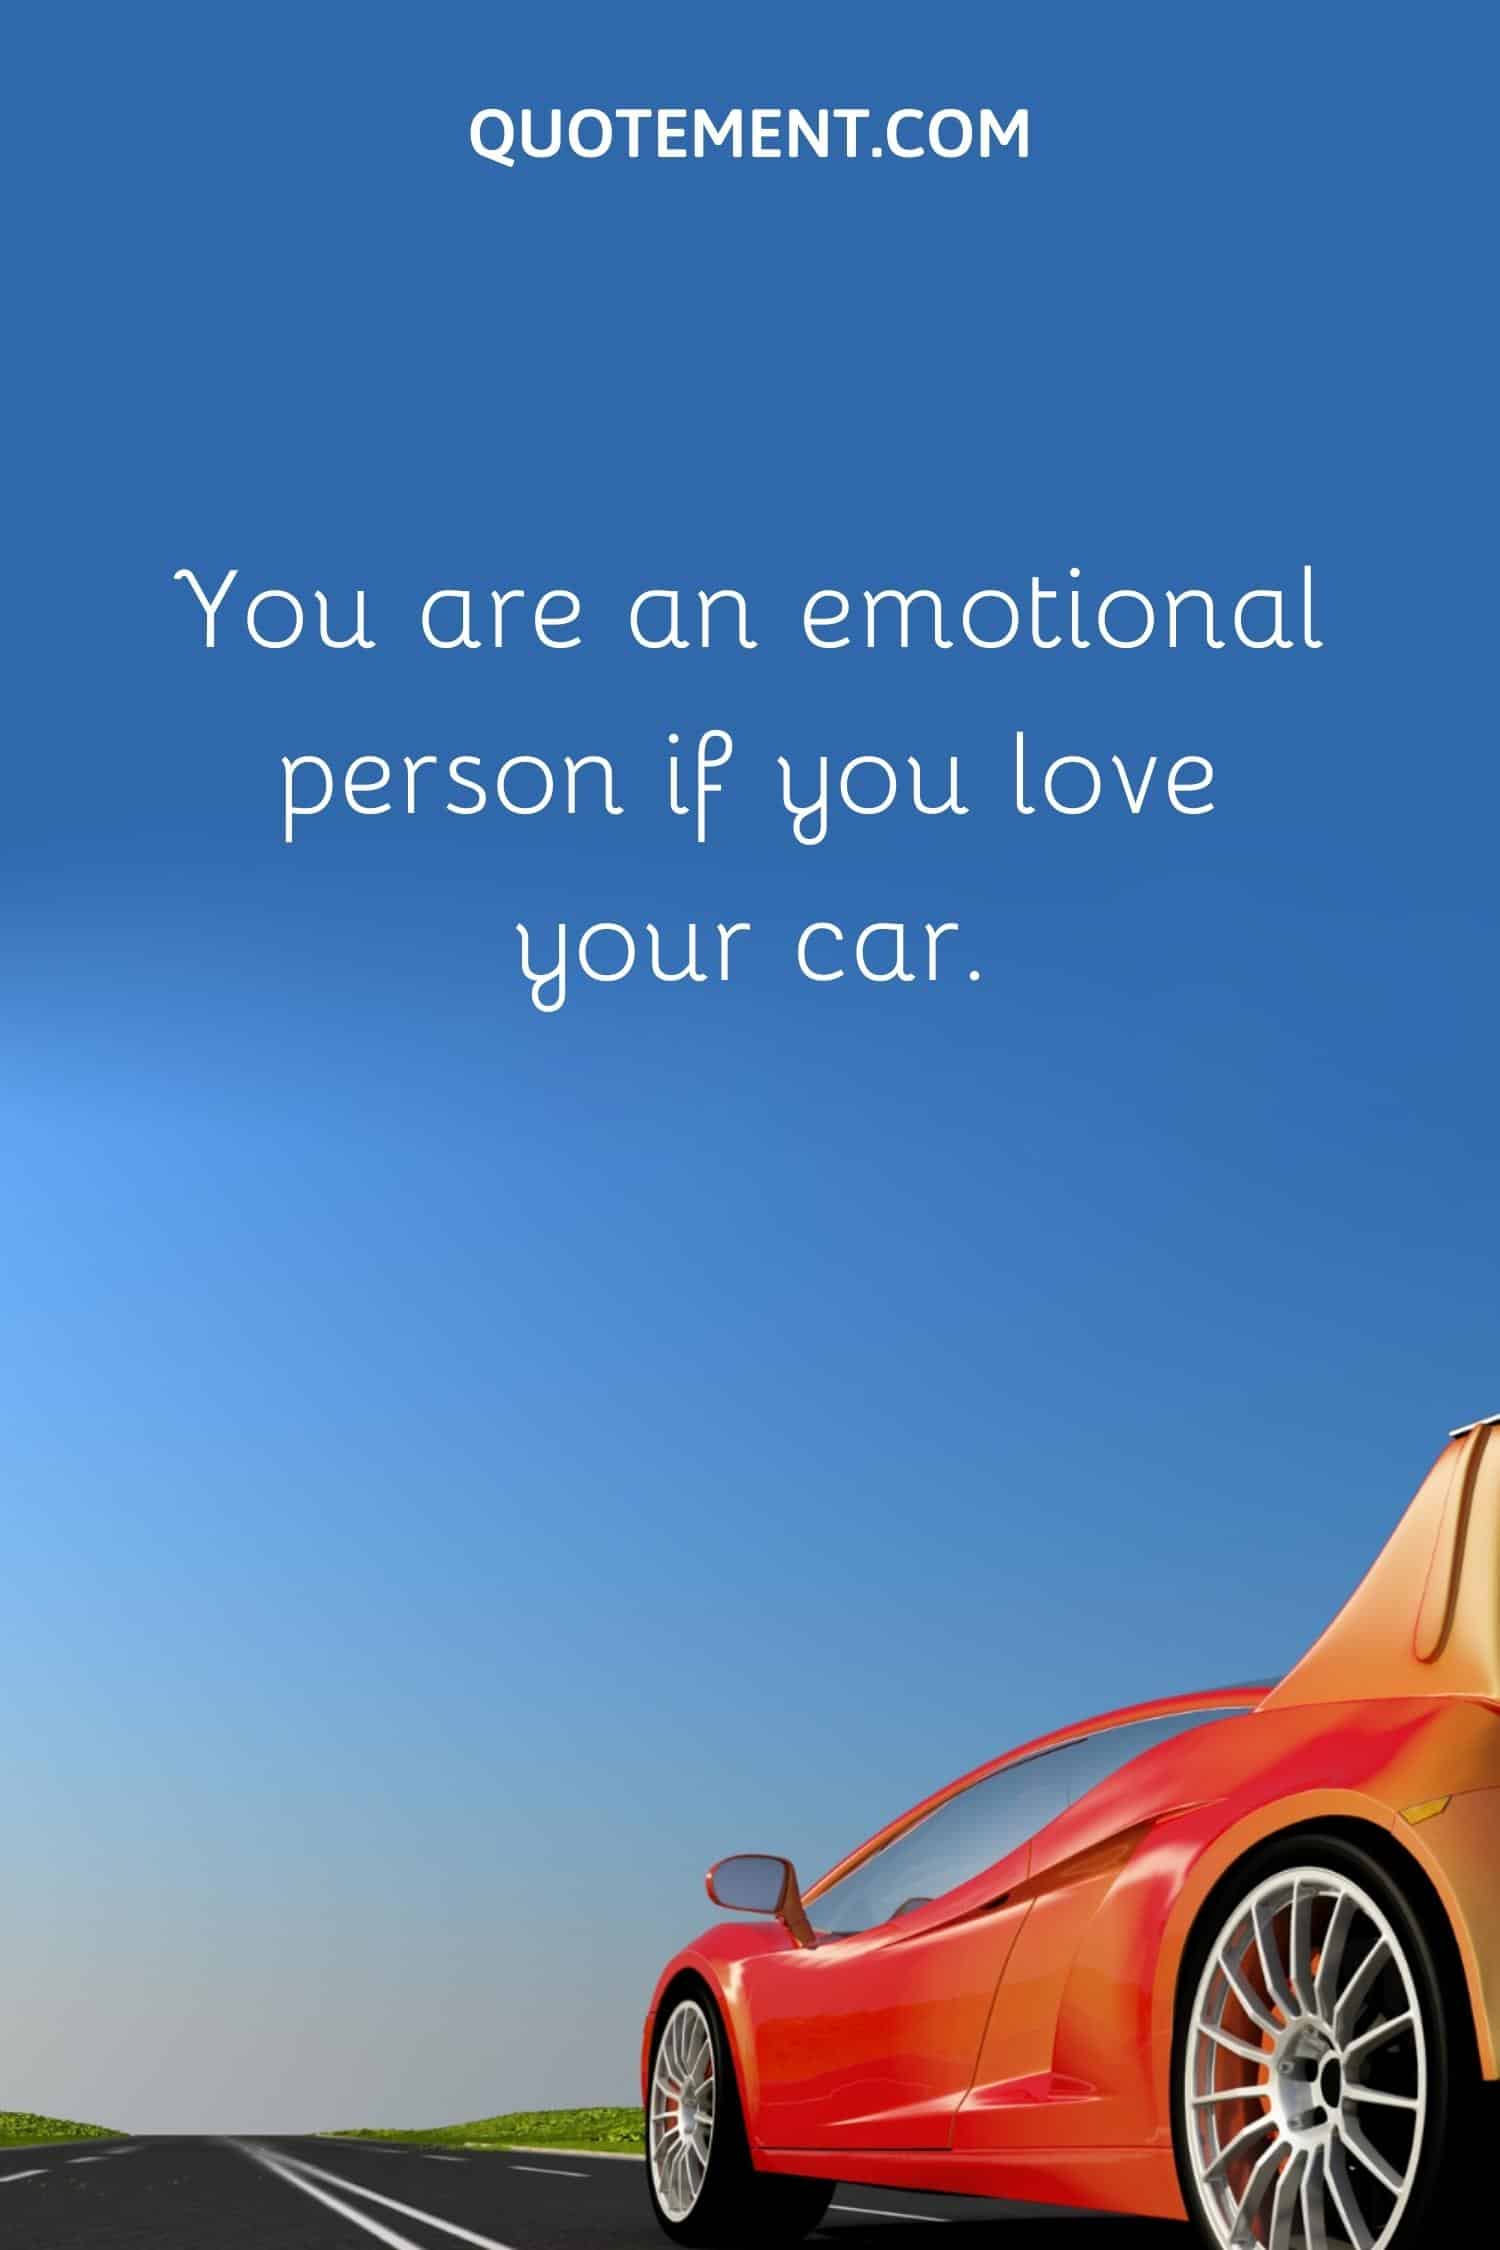 You are an emotional person if you love your car